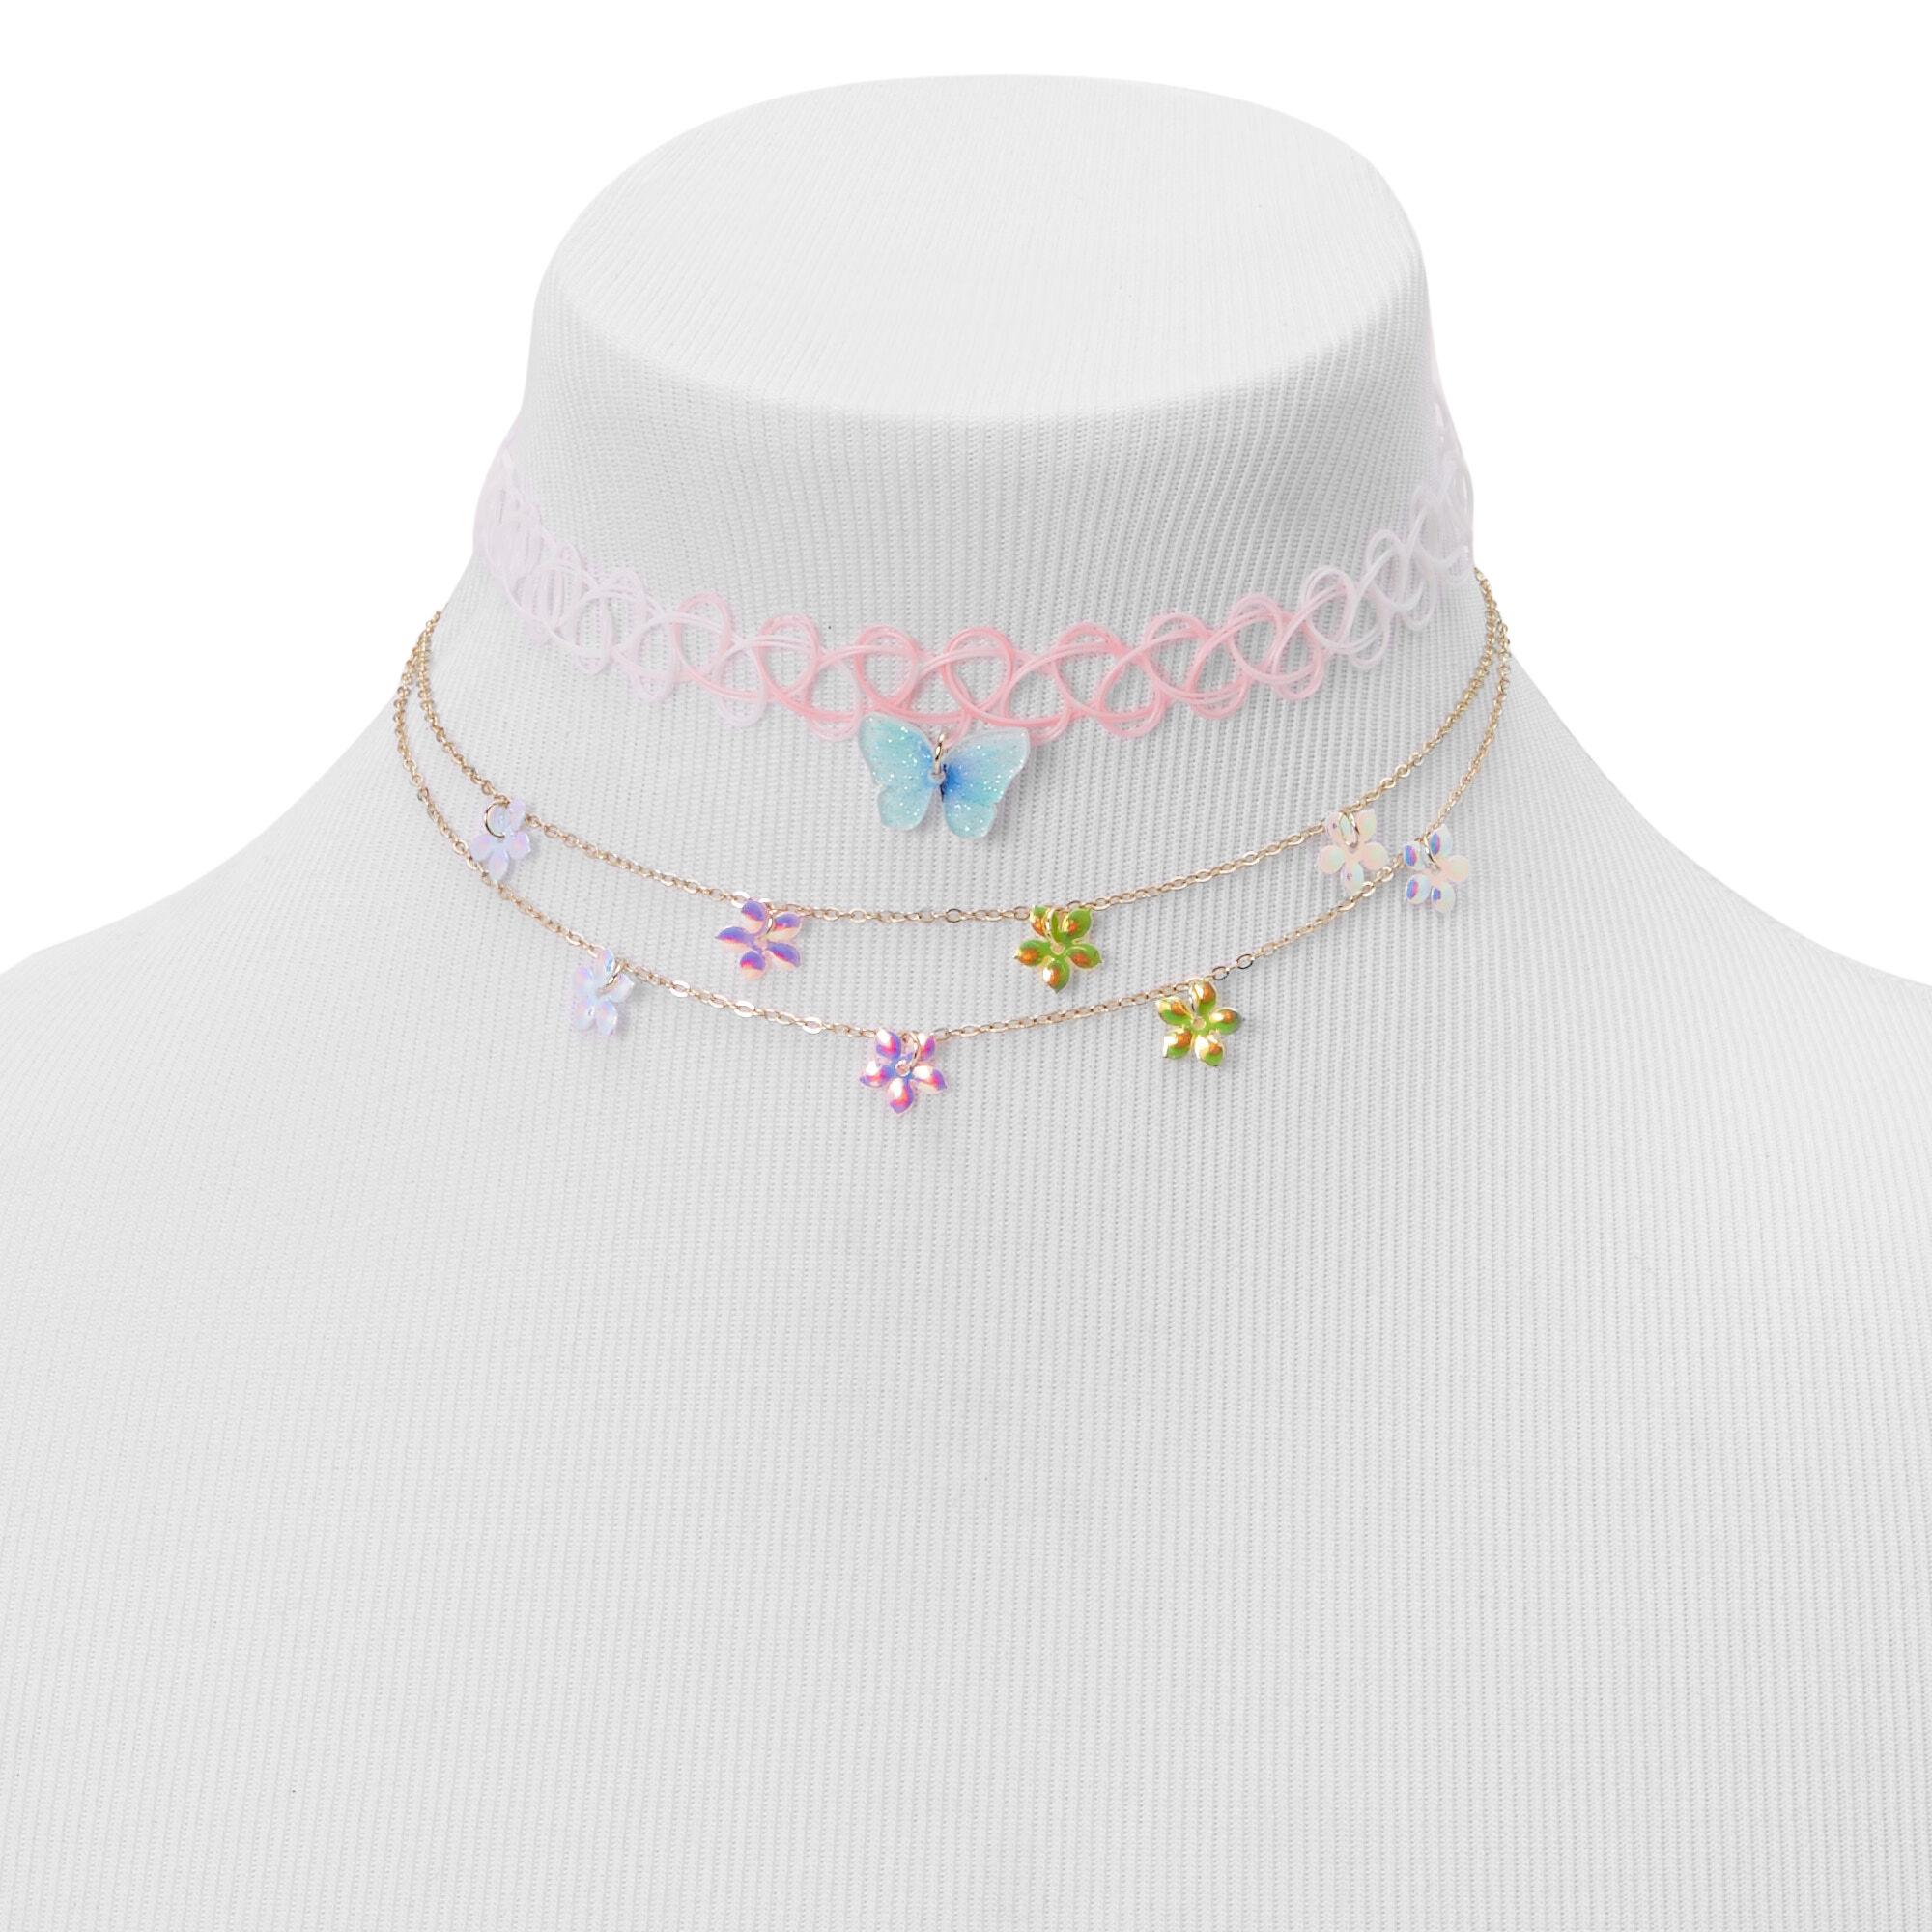 View Claires Club Floral Butterfly Choker Strand Necklaces 2 Pack information